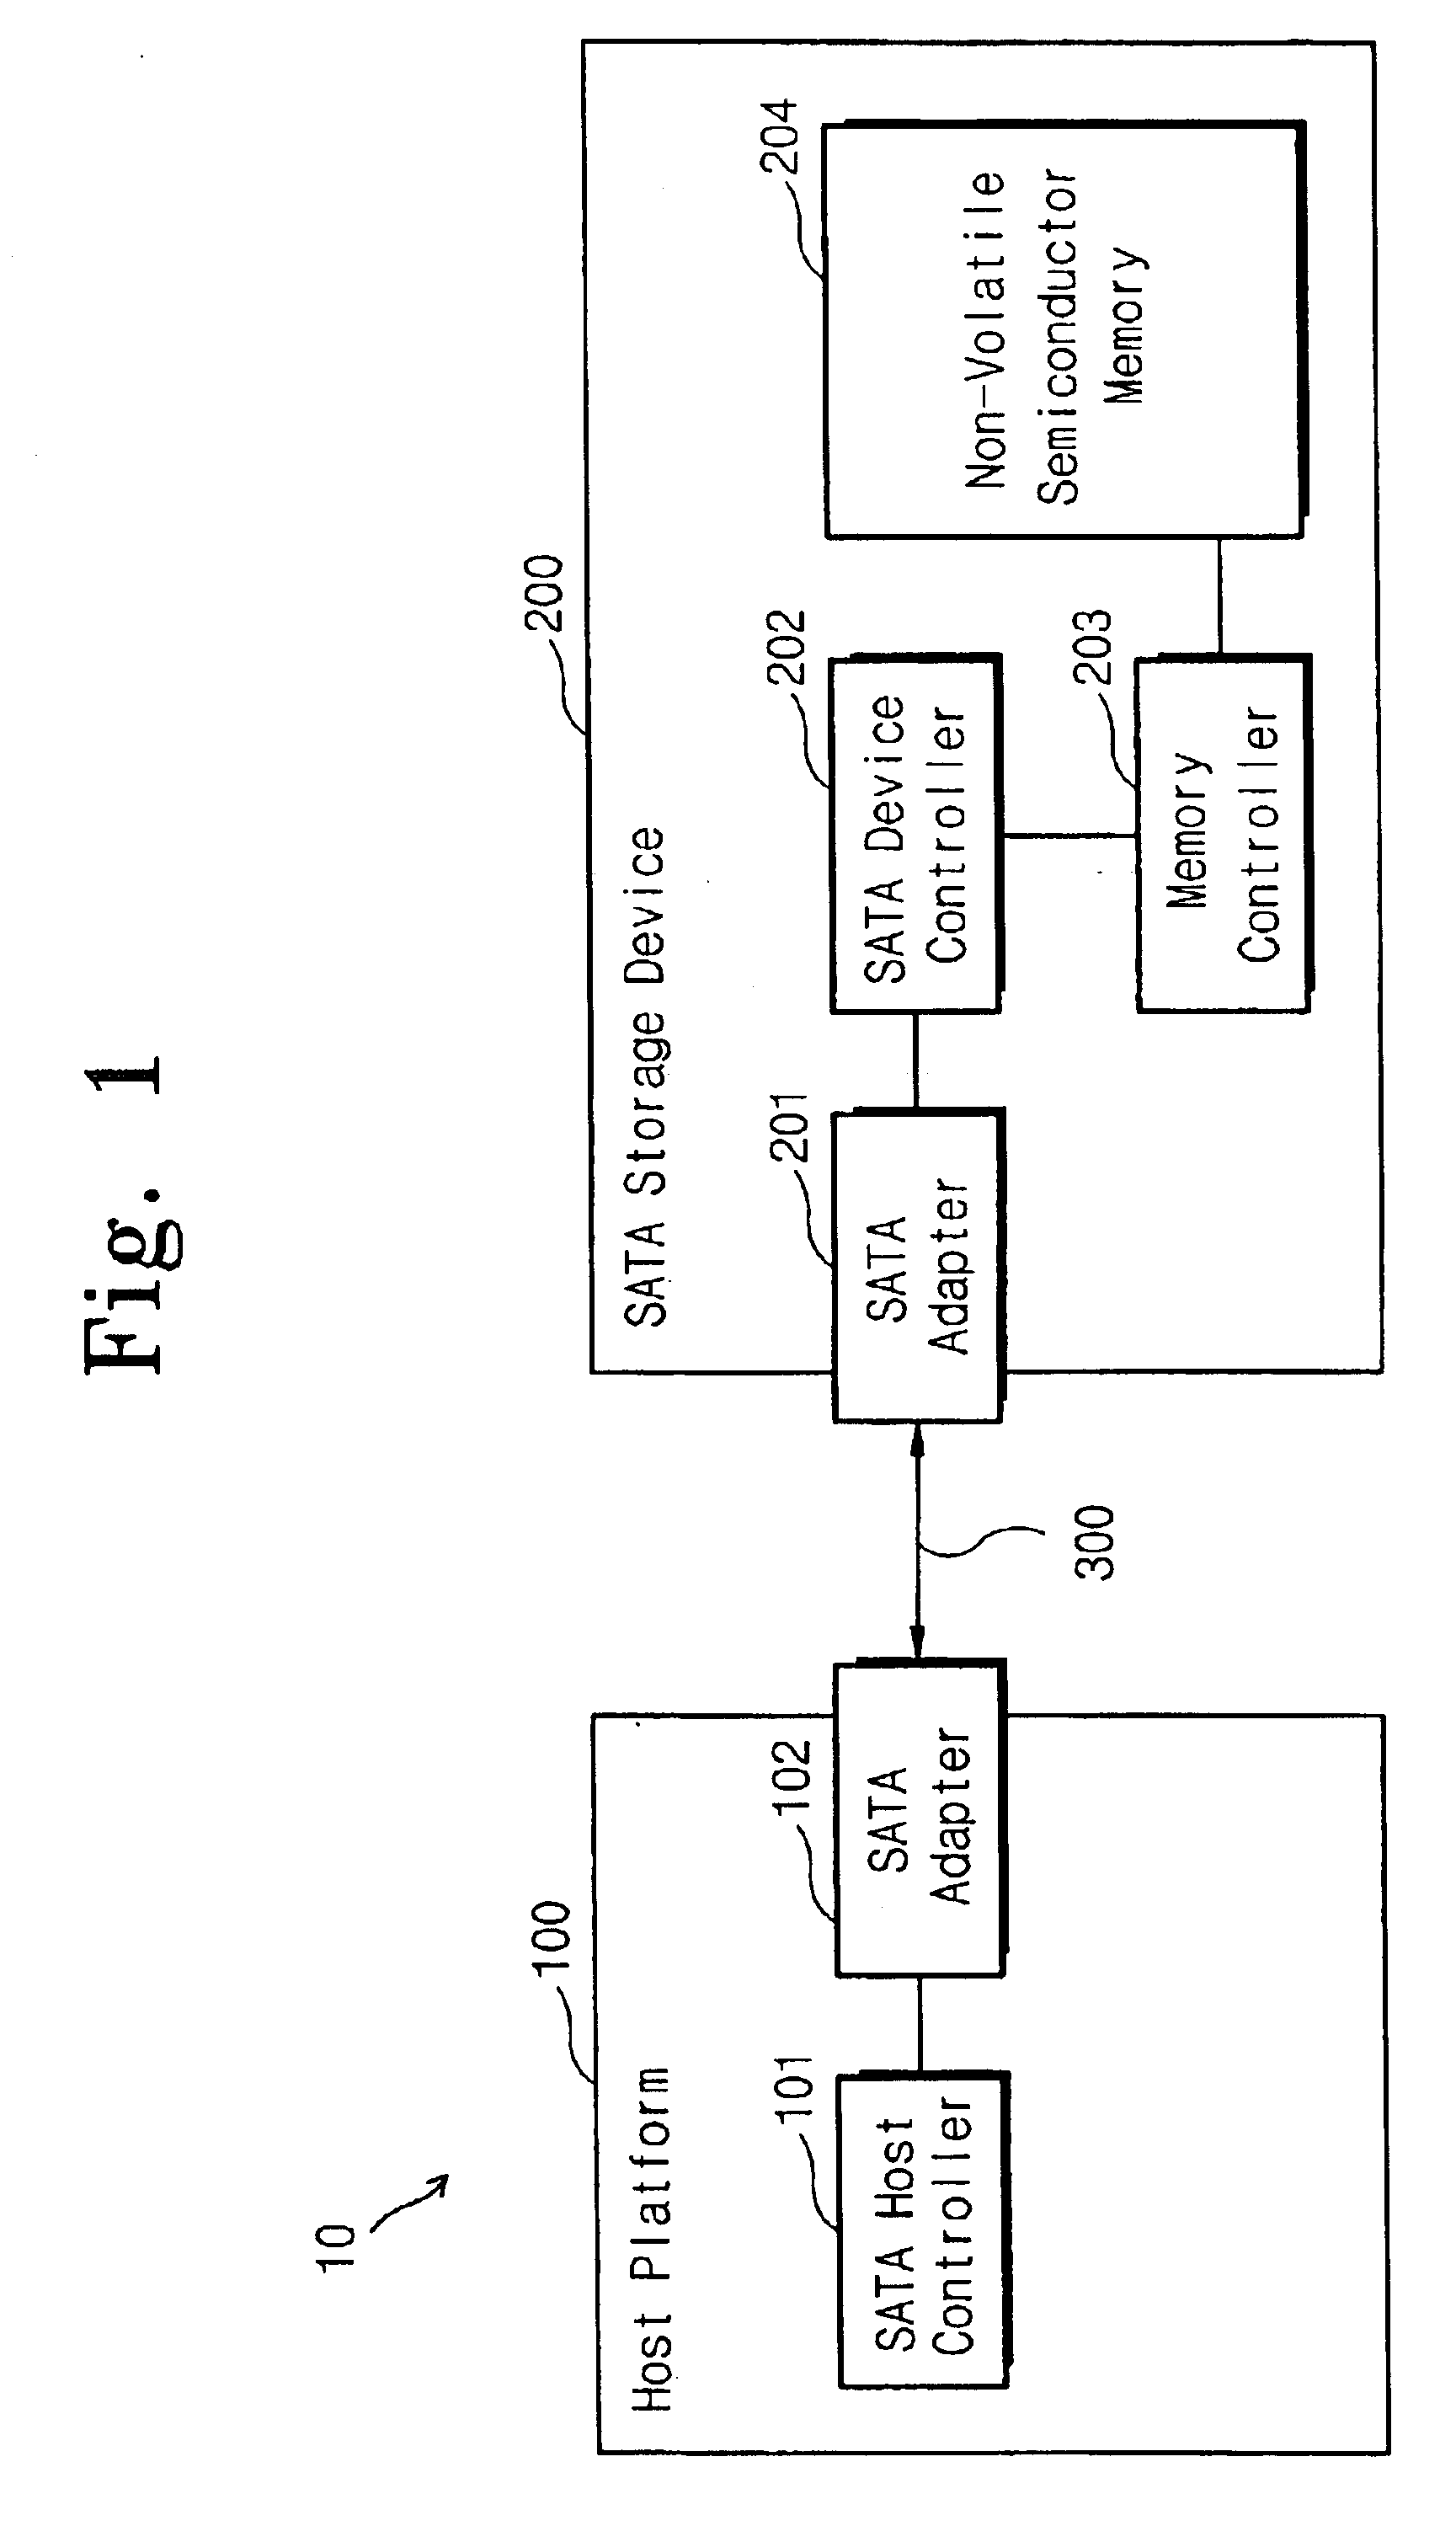 Non-volatile semiconductor memory device for connecting to serial advanced technology attachment cable